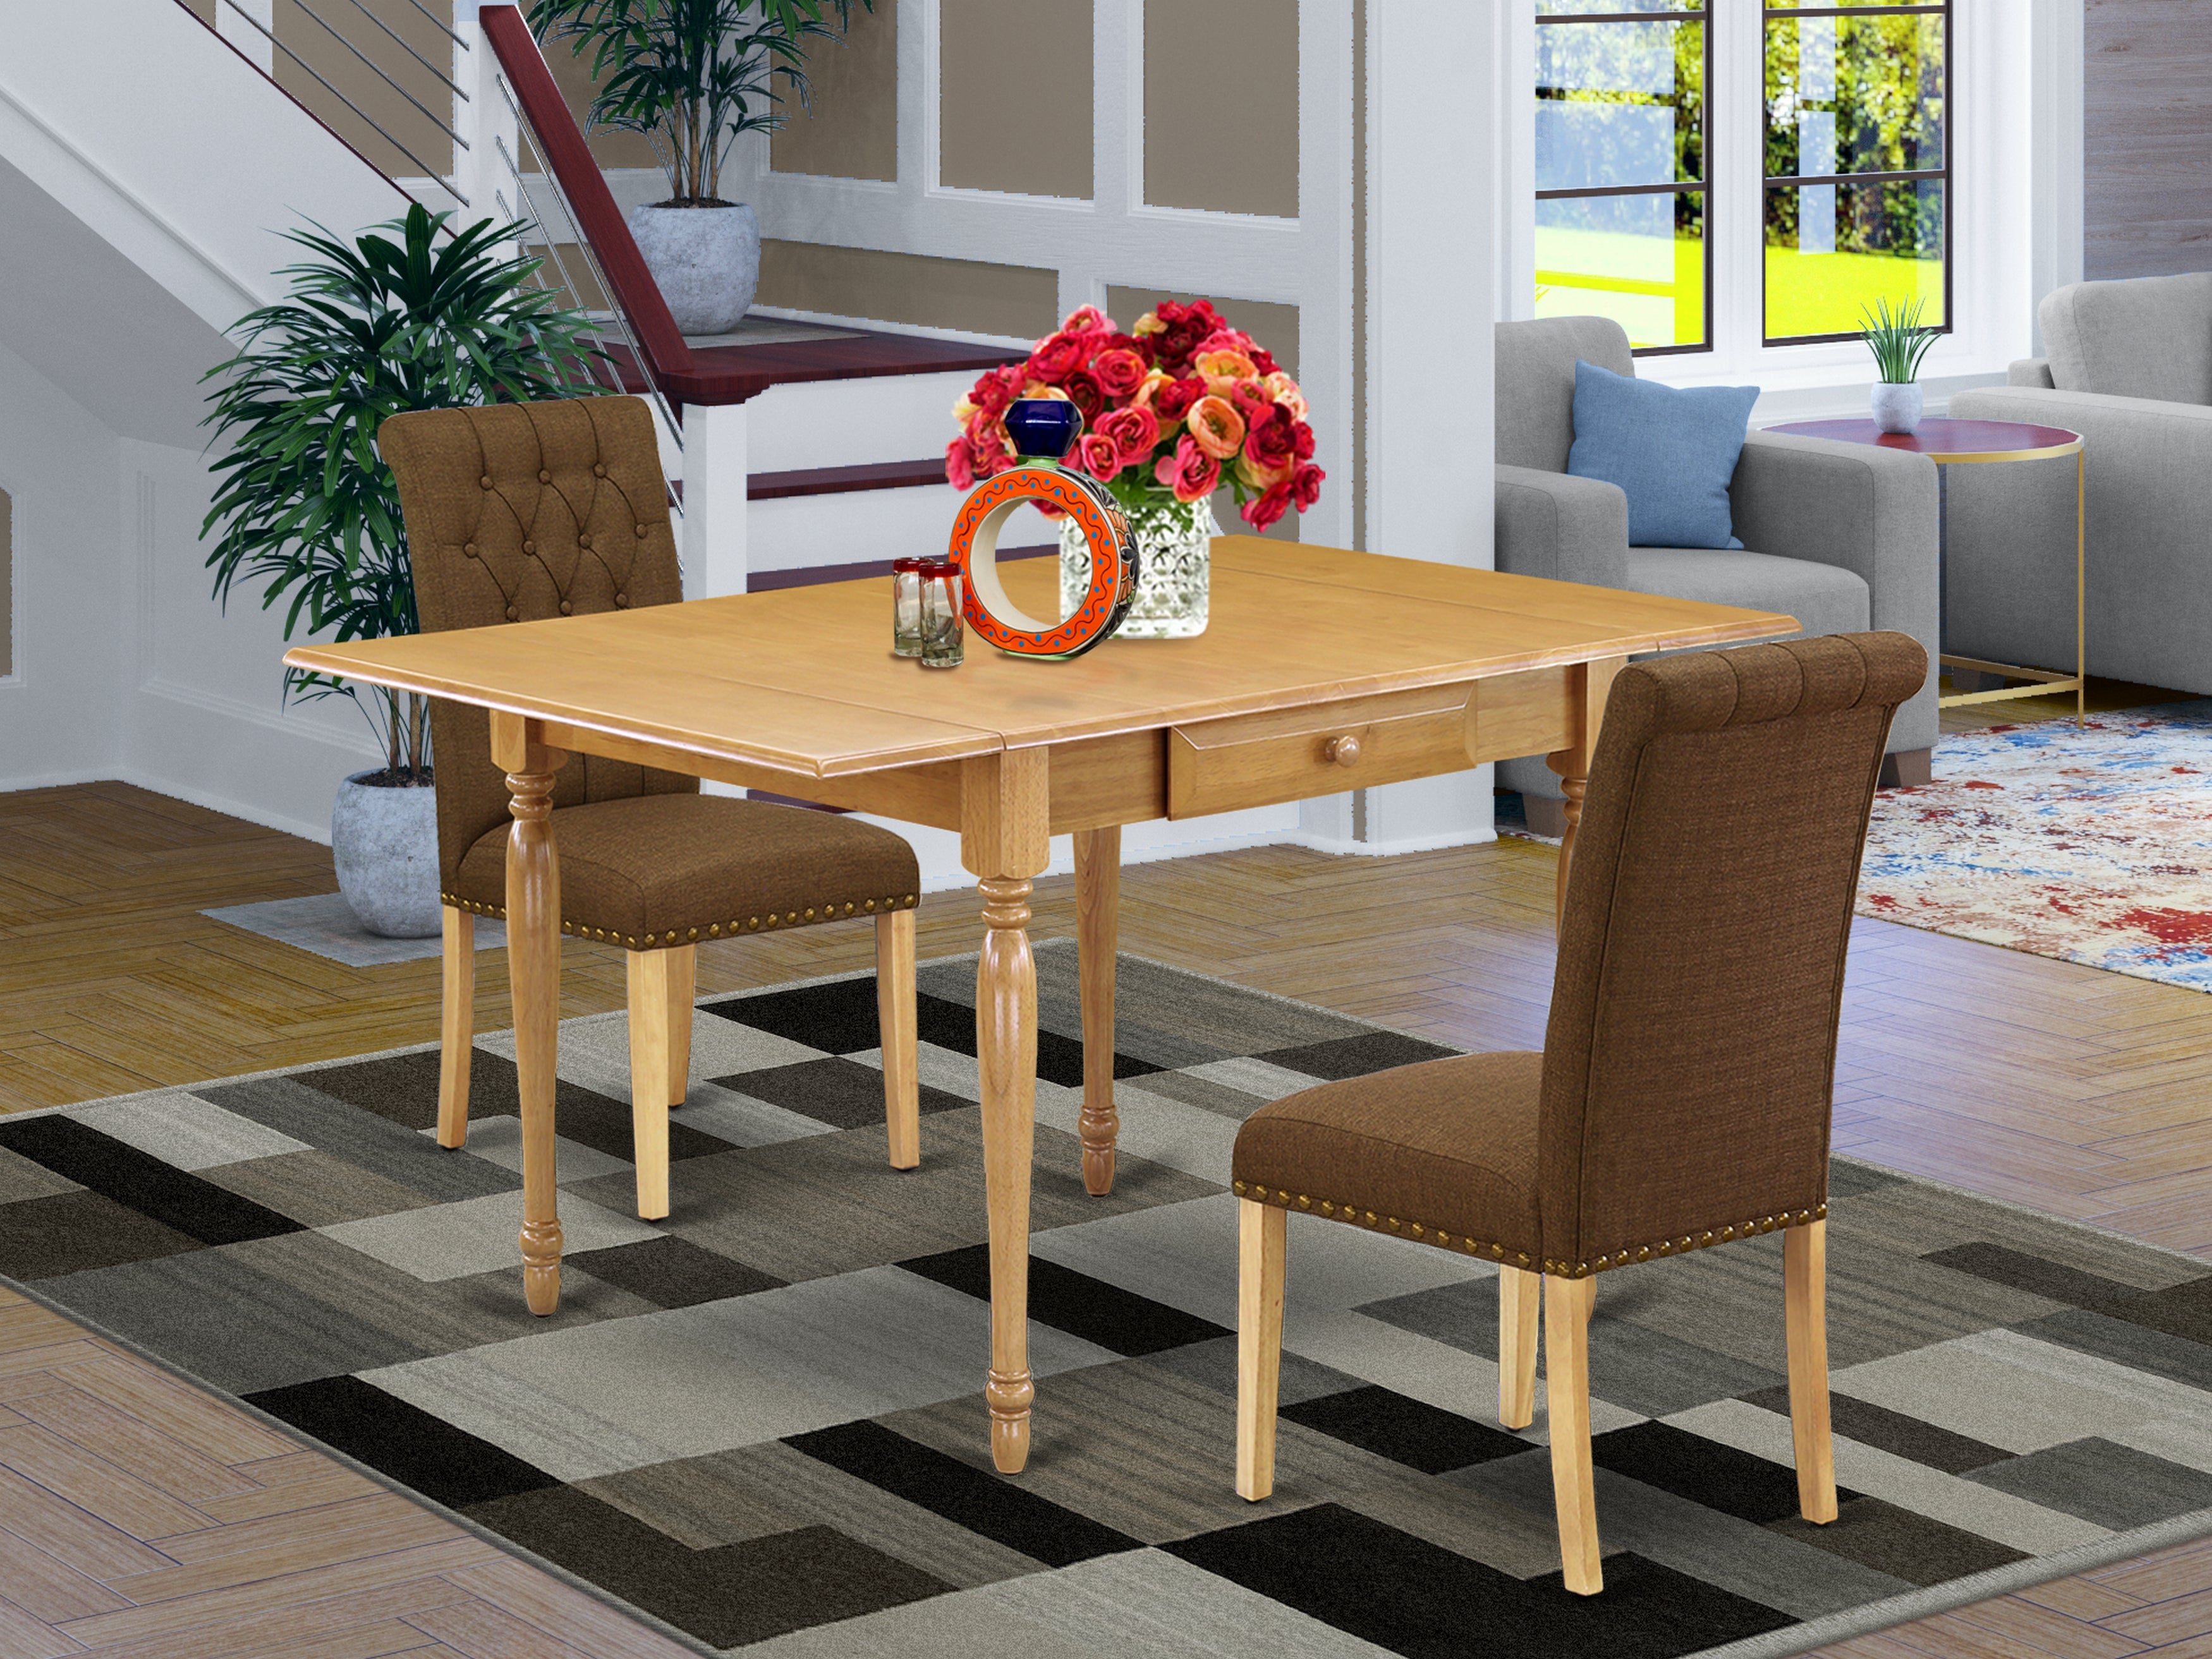 East West Furniture MZBR3-OAK-18 3Pc Dining Table Set for 2 Contains a Rectangle Table and 2 Parson Dining Chairs with Dark Coffee Color Linen Fabric, Drop Leaf Table with Full Back Chairs, Oak Finish